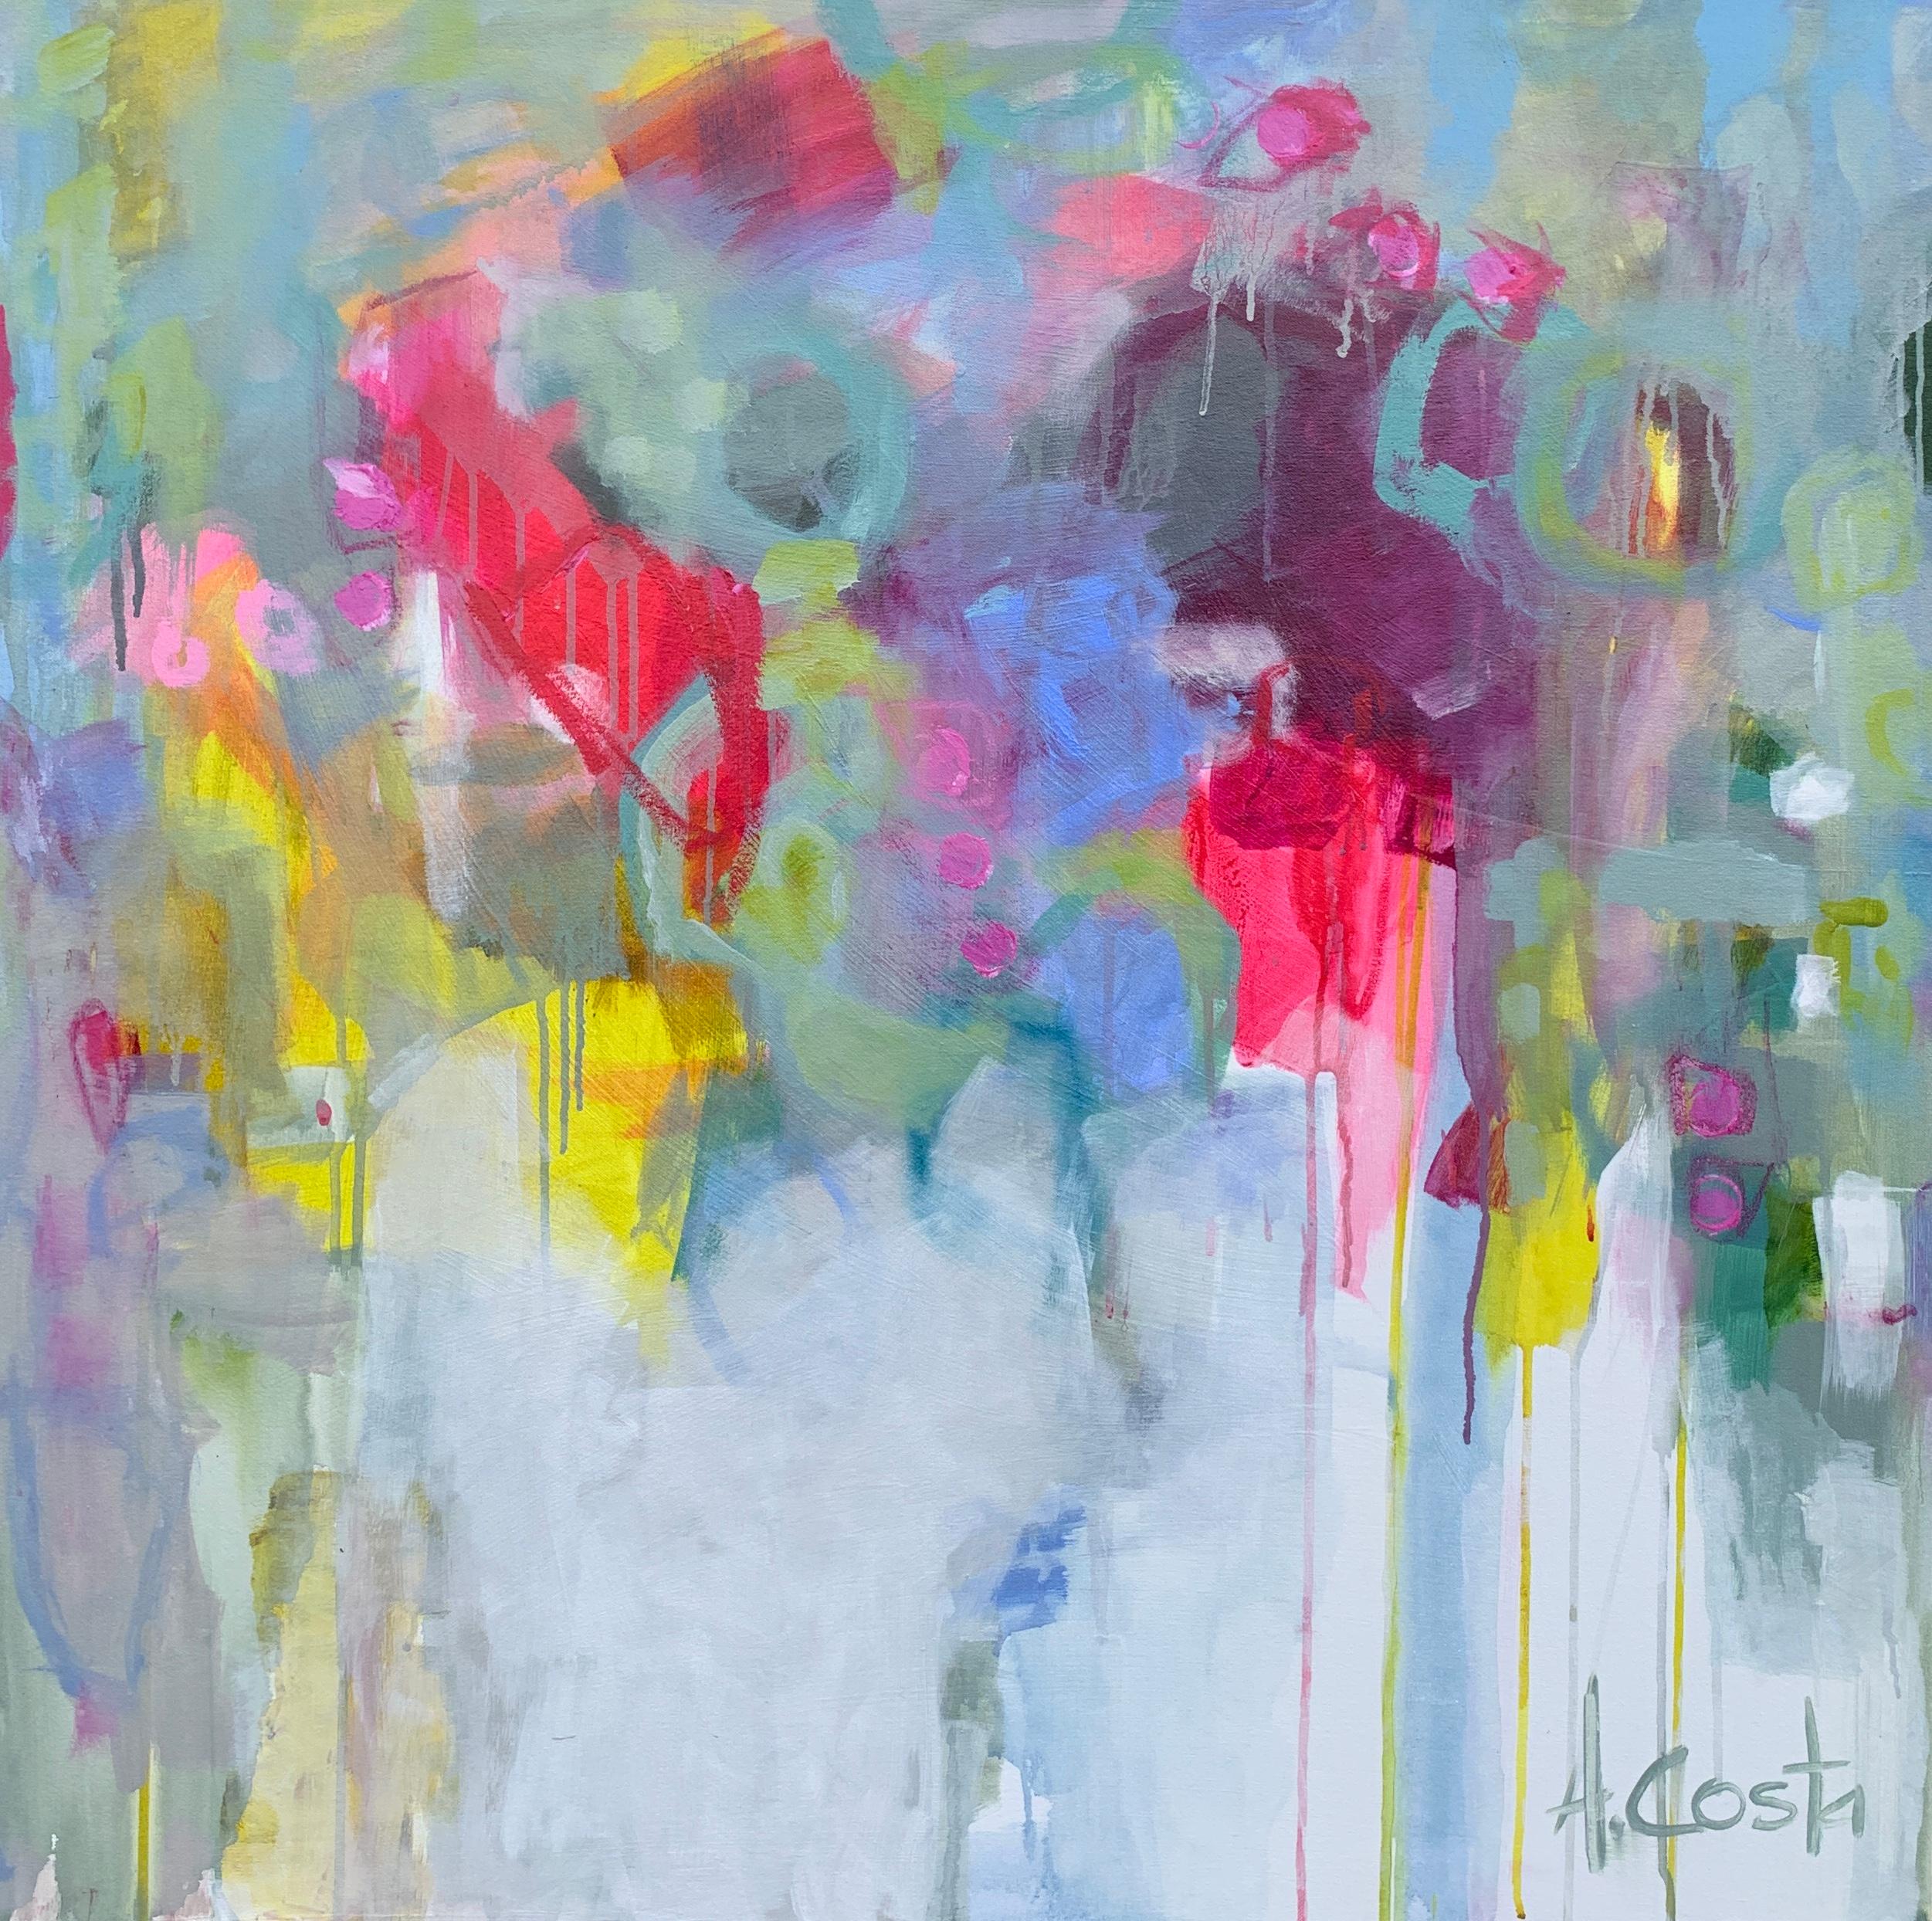 'Joy 1' is a large abstract oil on gesso painting of square format created by American artist Andrea Costa in 2020. Featuring a palette made of blue, pink, purple, yellow and green tones, the painting presents a joyous arrangement of colors and bold